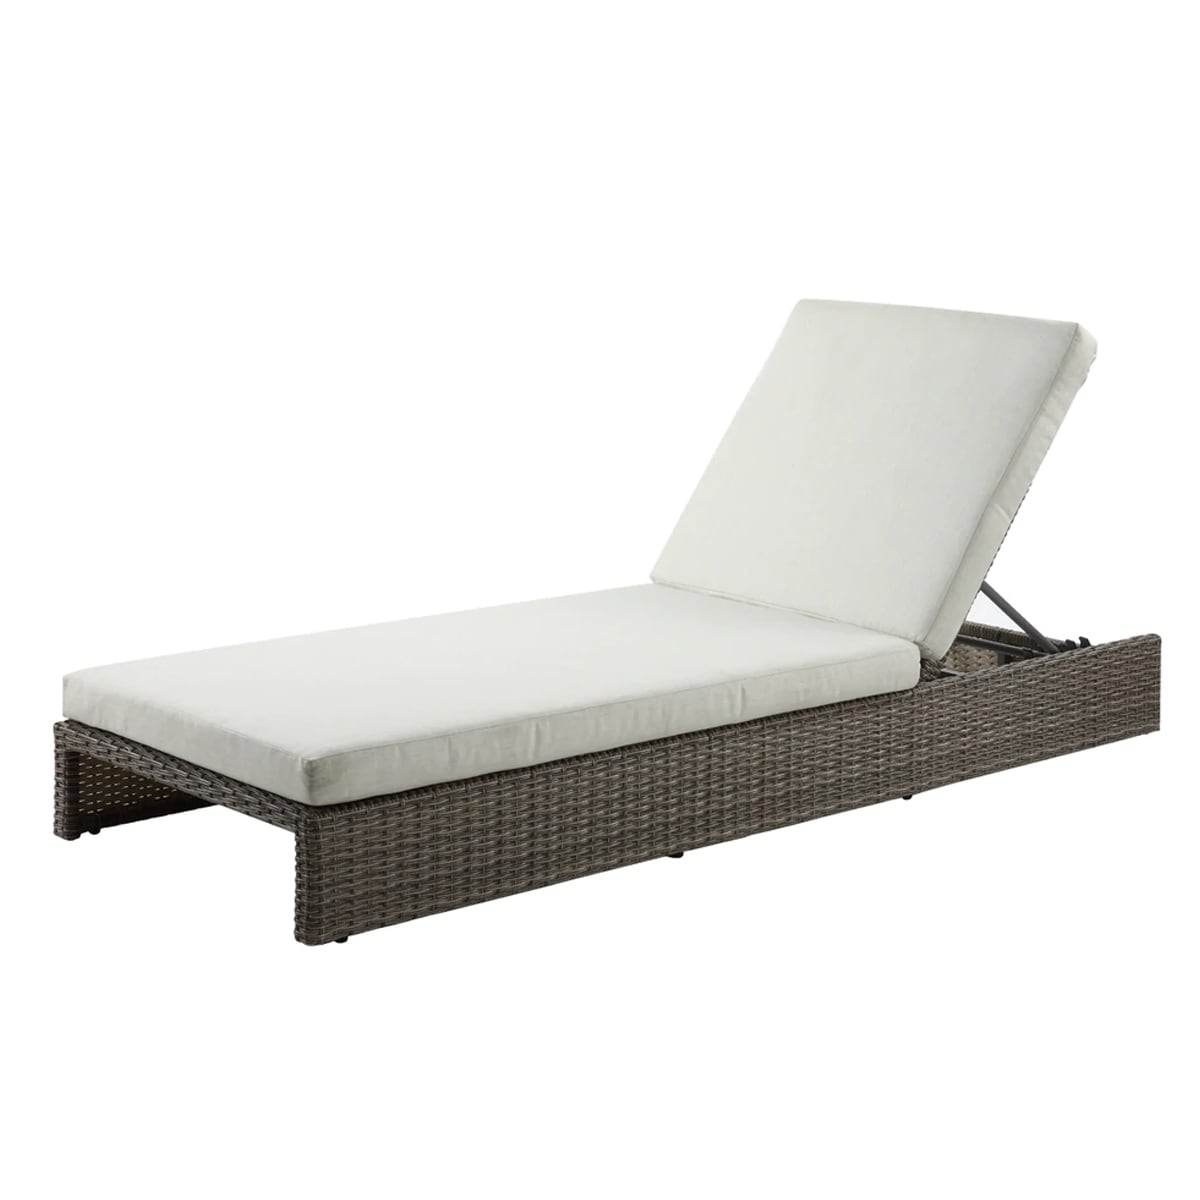 71 Inch Outdoor Patio Lounge Chaise  All Weather Rattan Wicker  Brown White